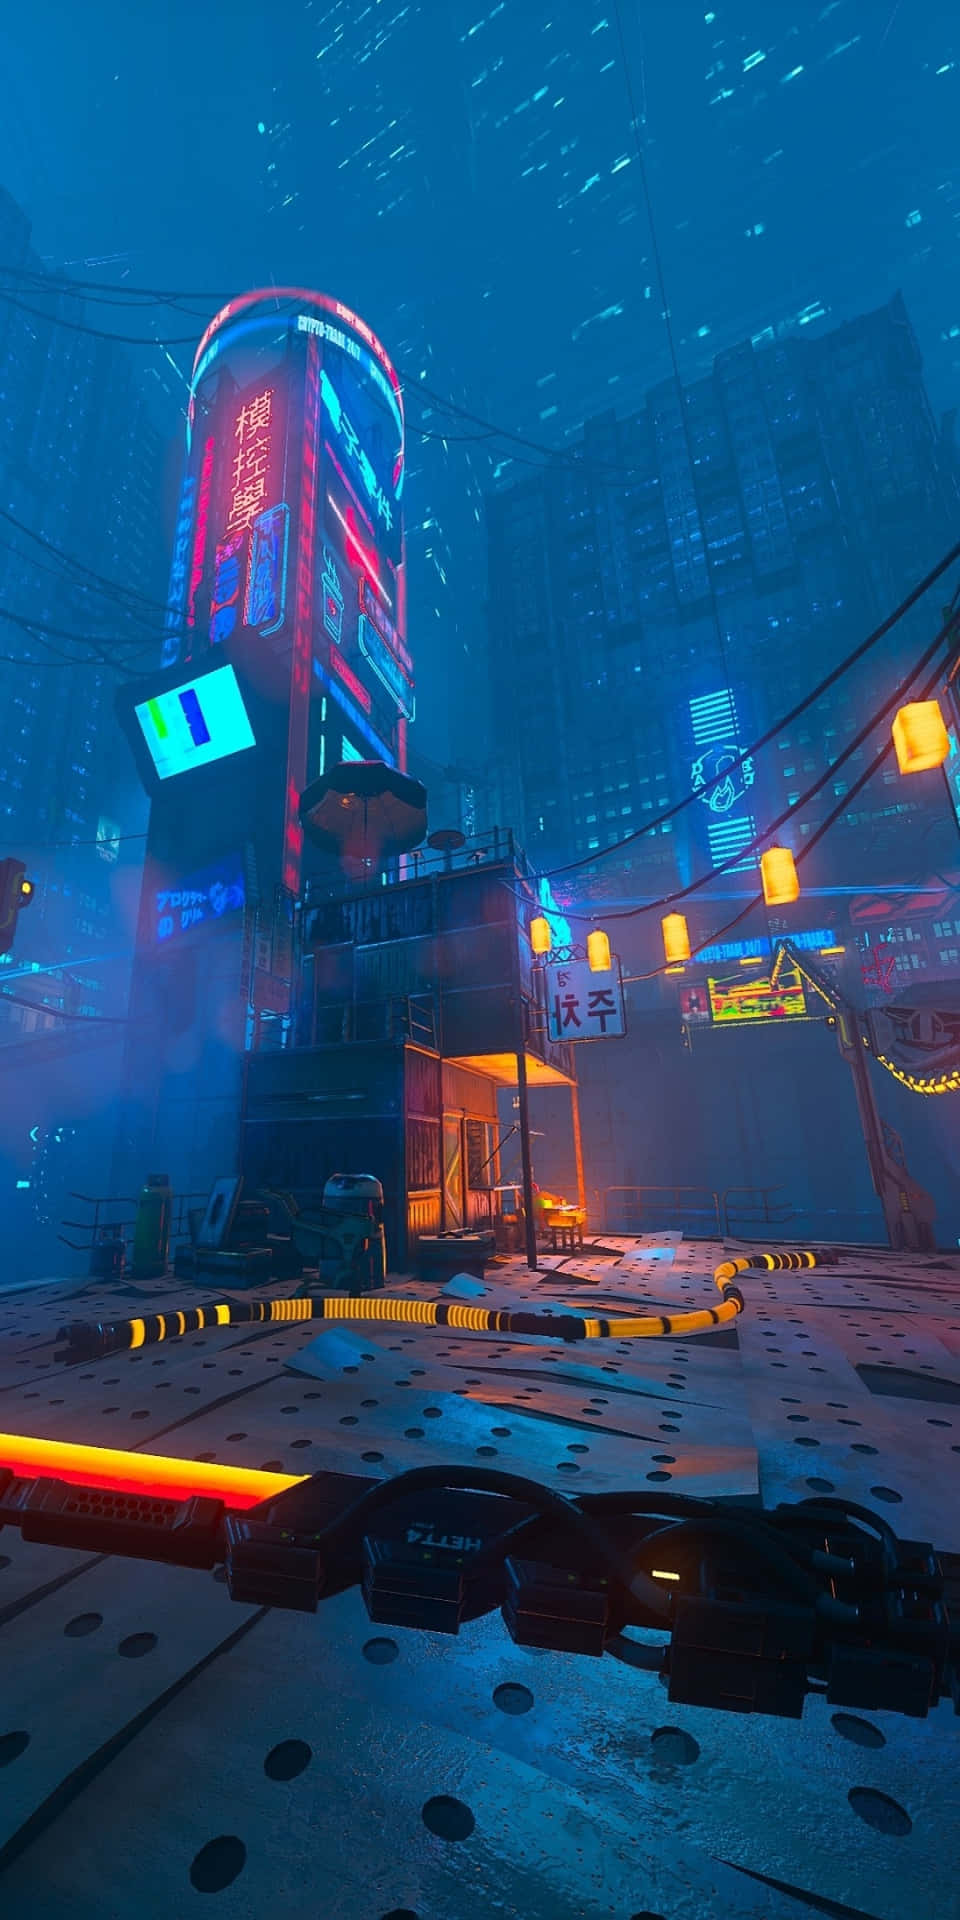 A Screenshot Of A City With Neon Lights And Neon Signs